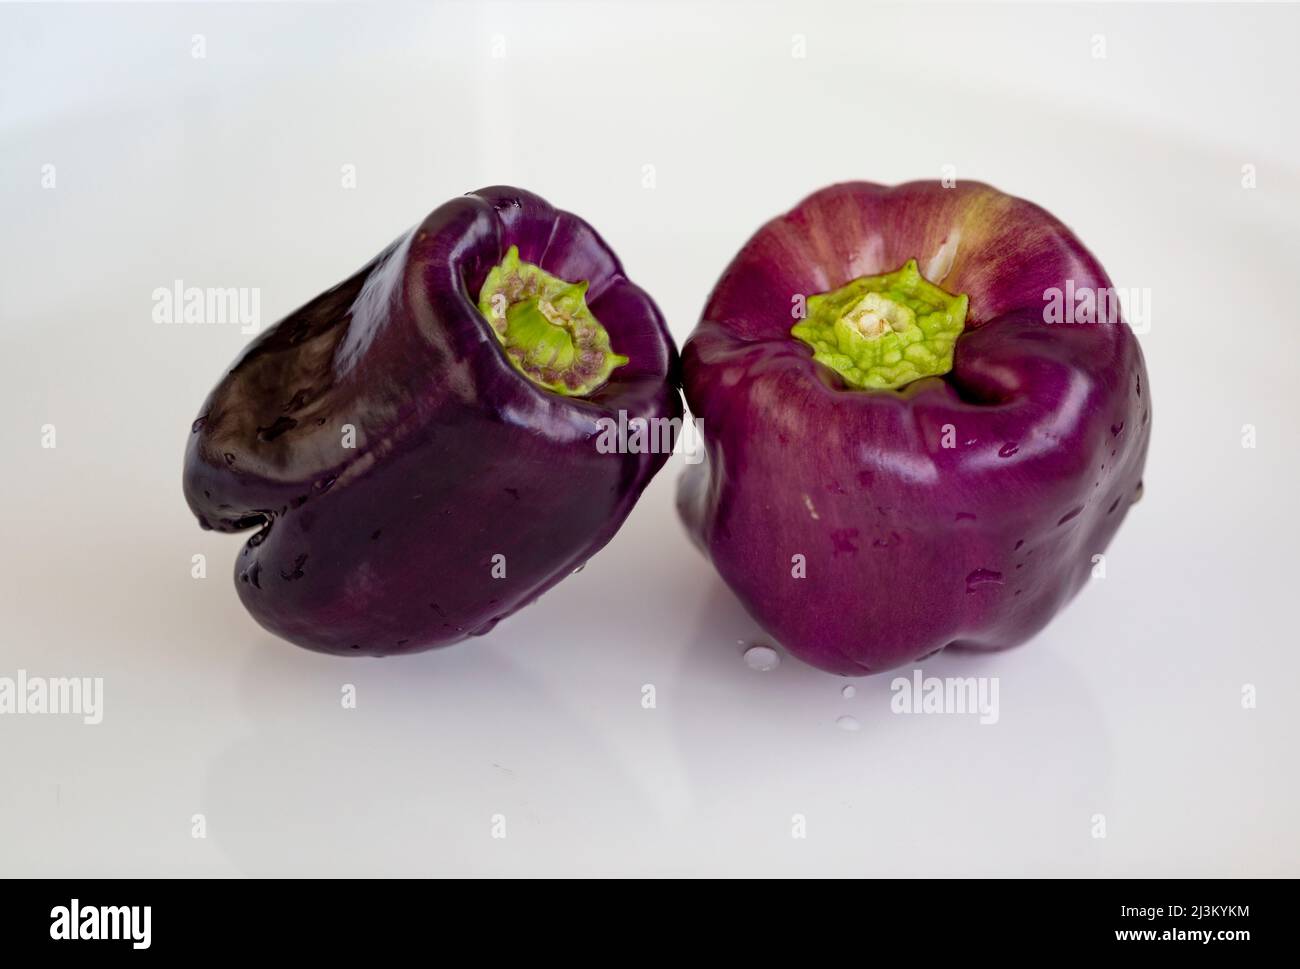 Purple bell peppers on a white background; Studio Stock Photo